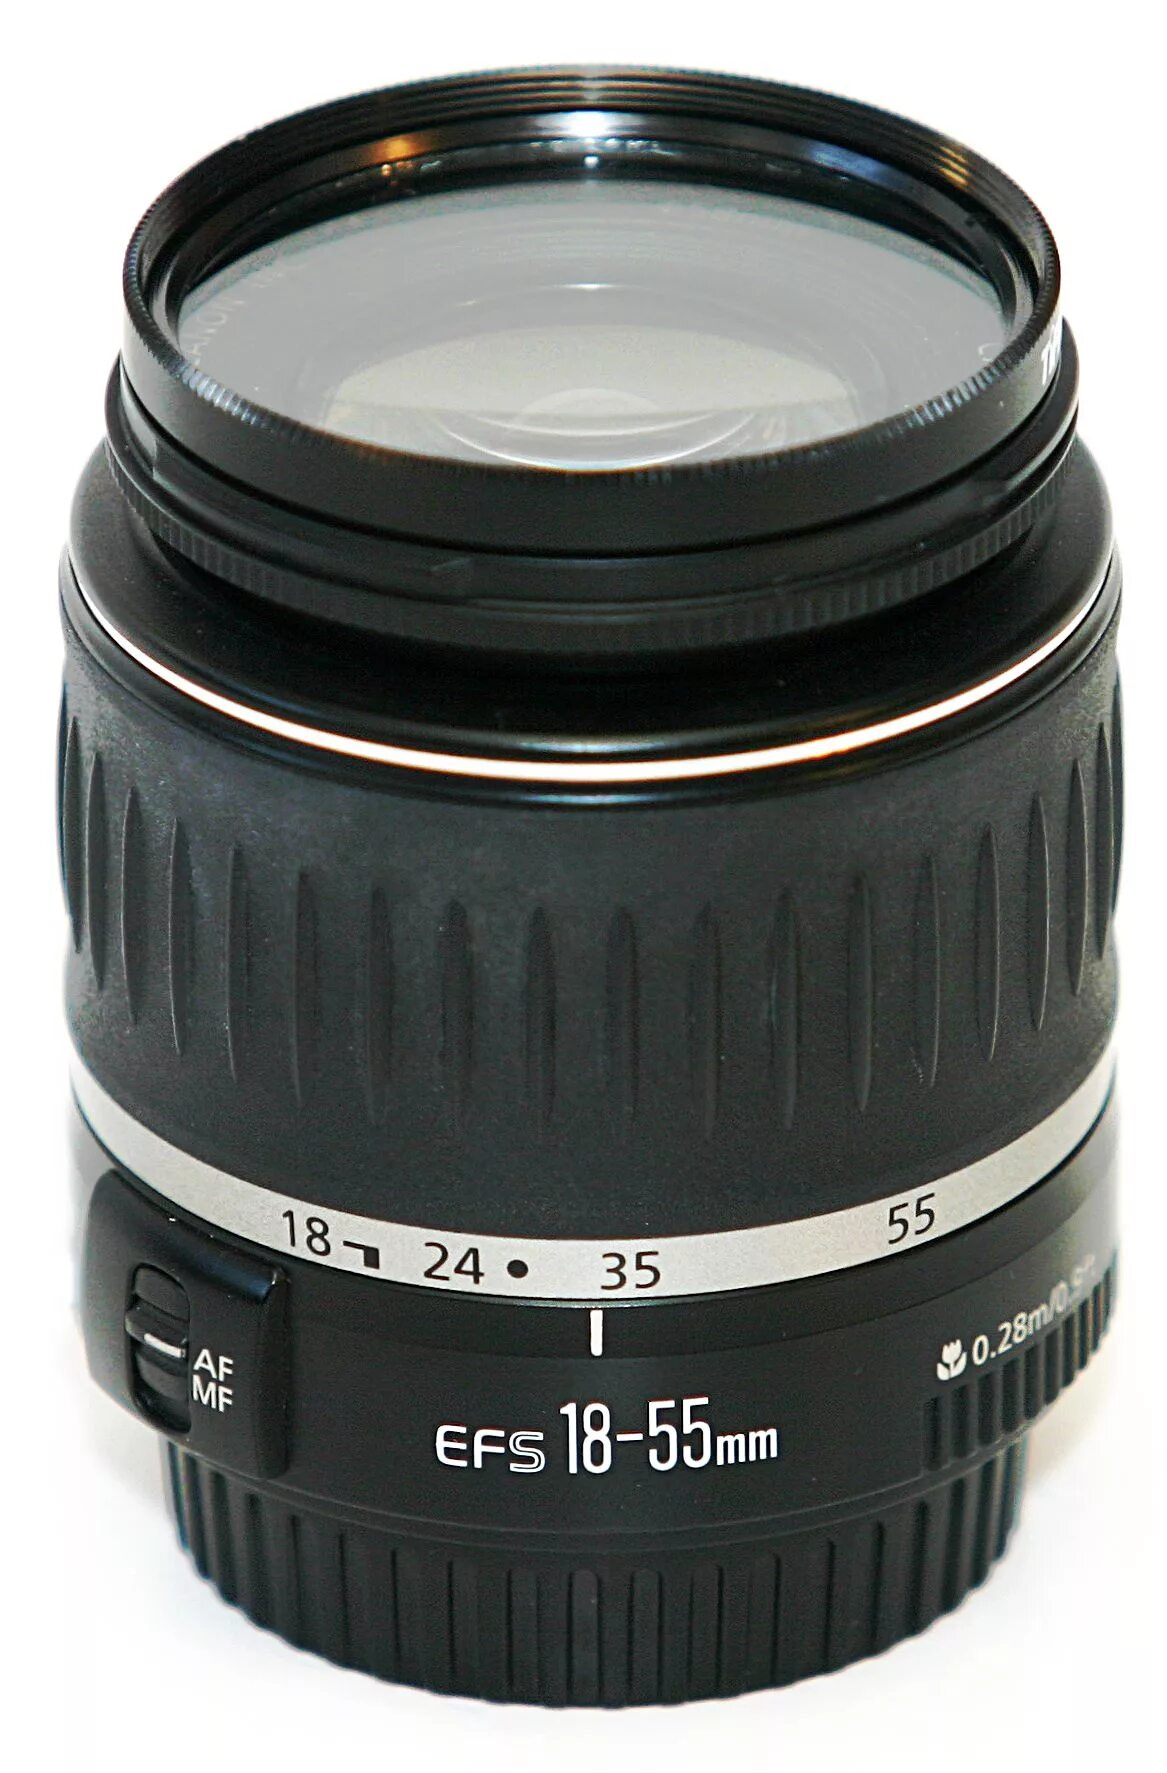 Ef s 18 55mm f 3.5 5.6. Canon EF-S 18-55mm. Объектив Canon 18-55mm Kit.